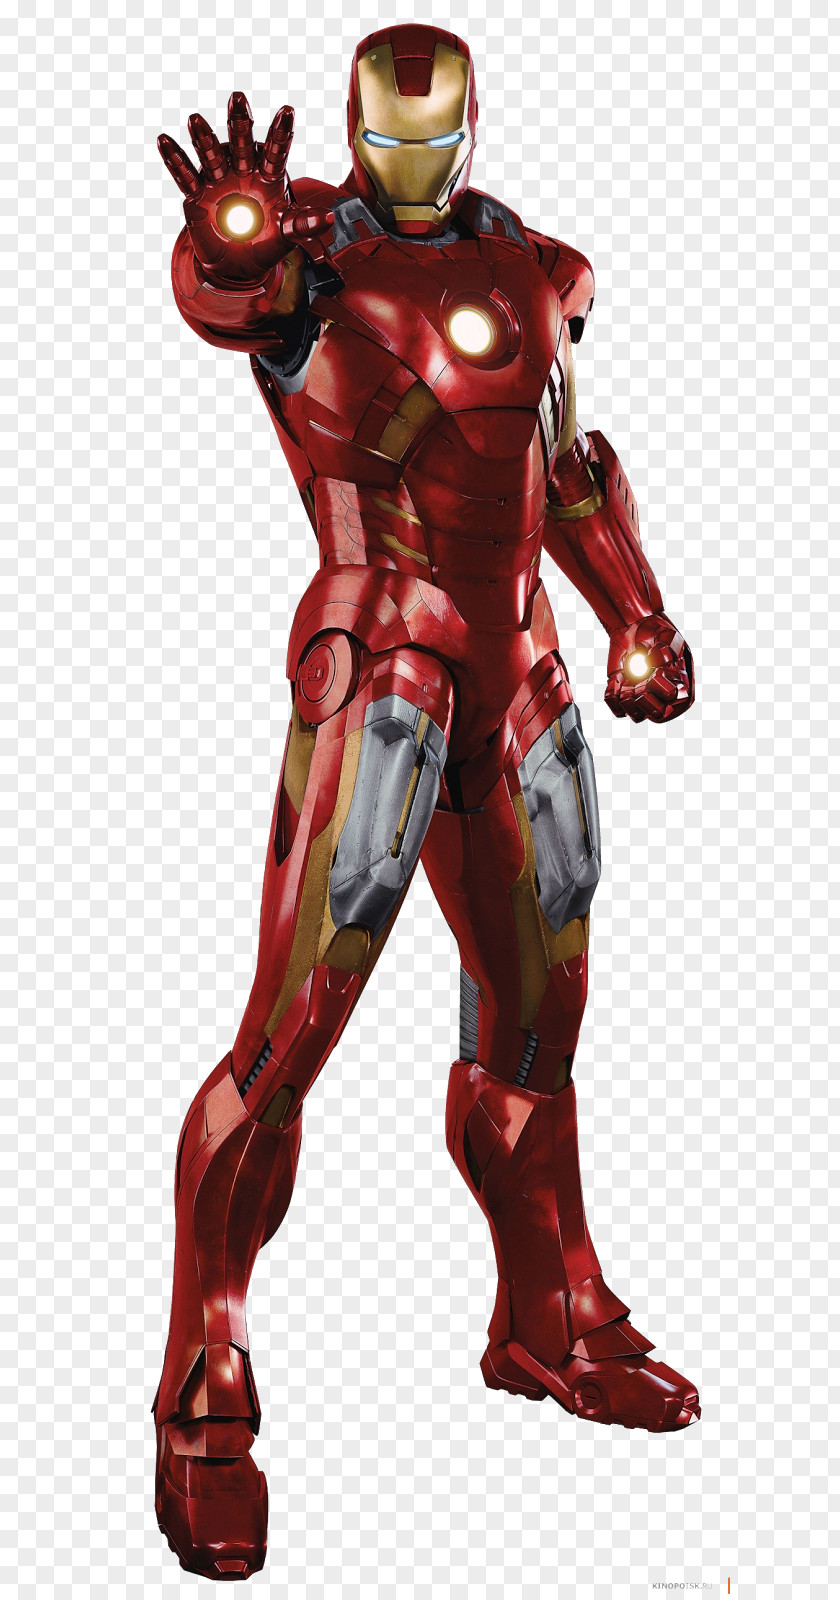 Iron Man's Armor Edwin Jarvis Captain America Marvel Cinematic Universe PNG